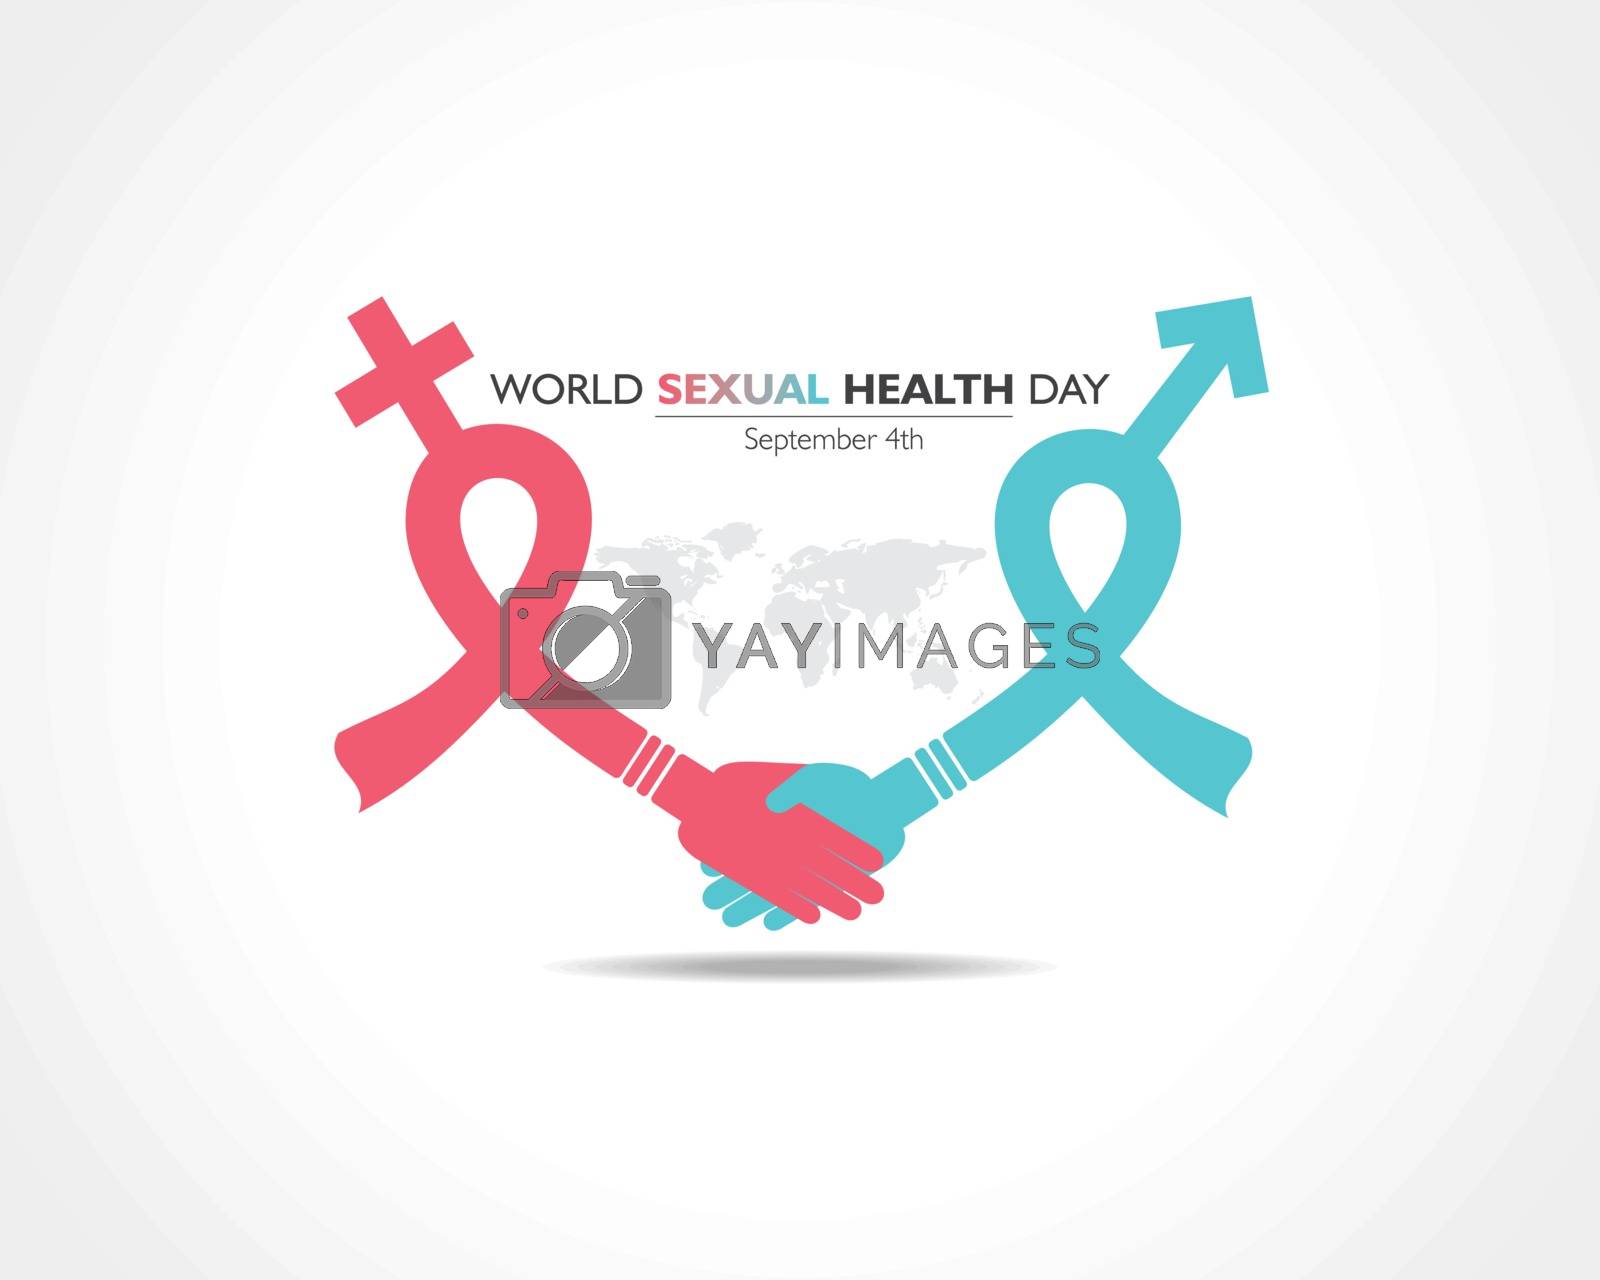 Royalty free image of World Sexual Health Day Concept which is held on September 4th by graphicsdunia4you